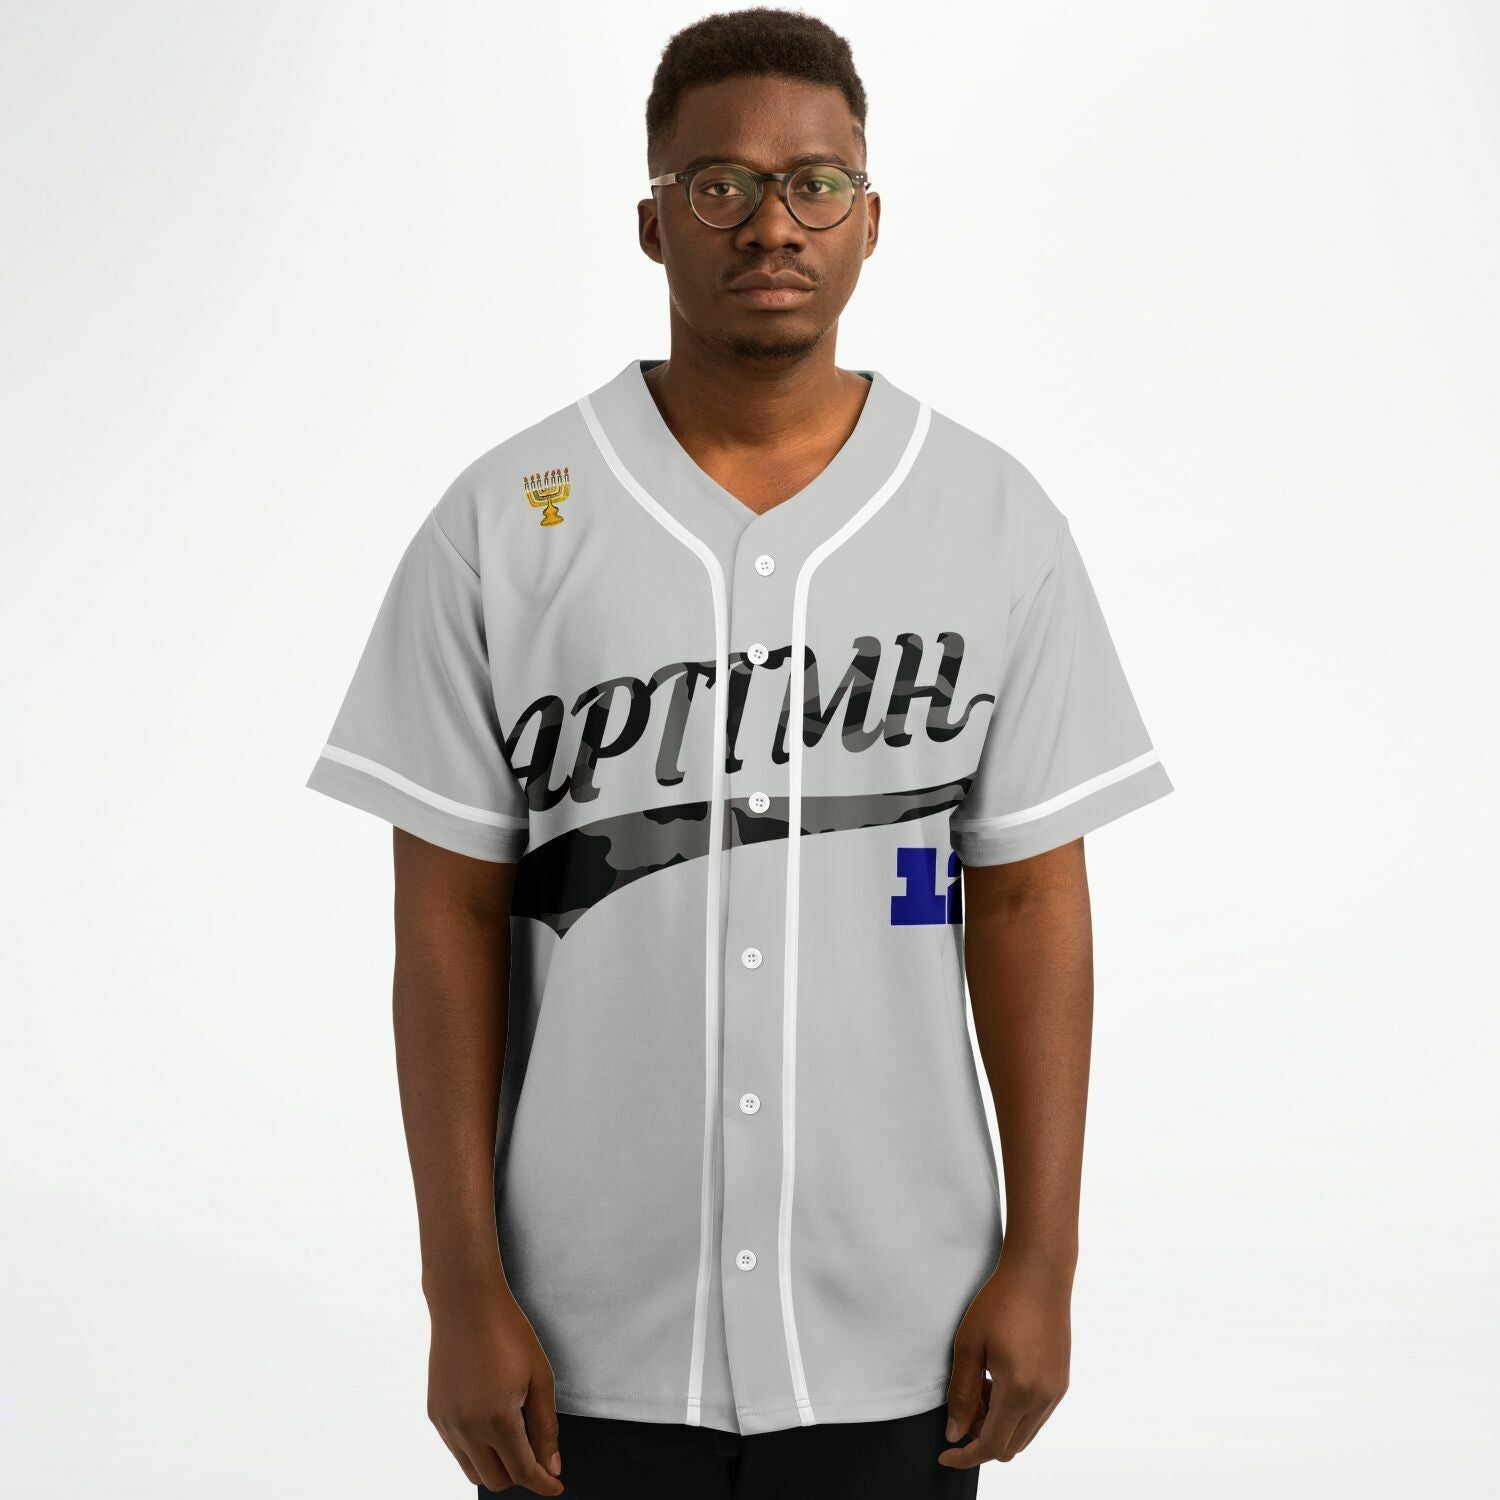 Hebrew Israelite All Praises To The Most High Camo/Grey Baseball Jersey